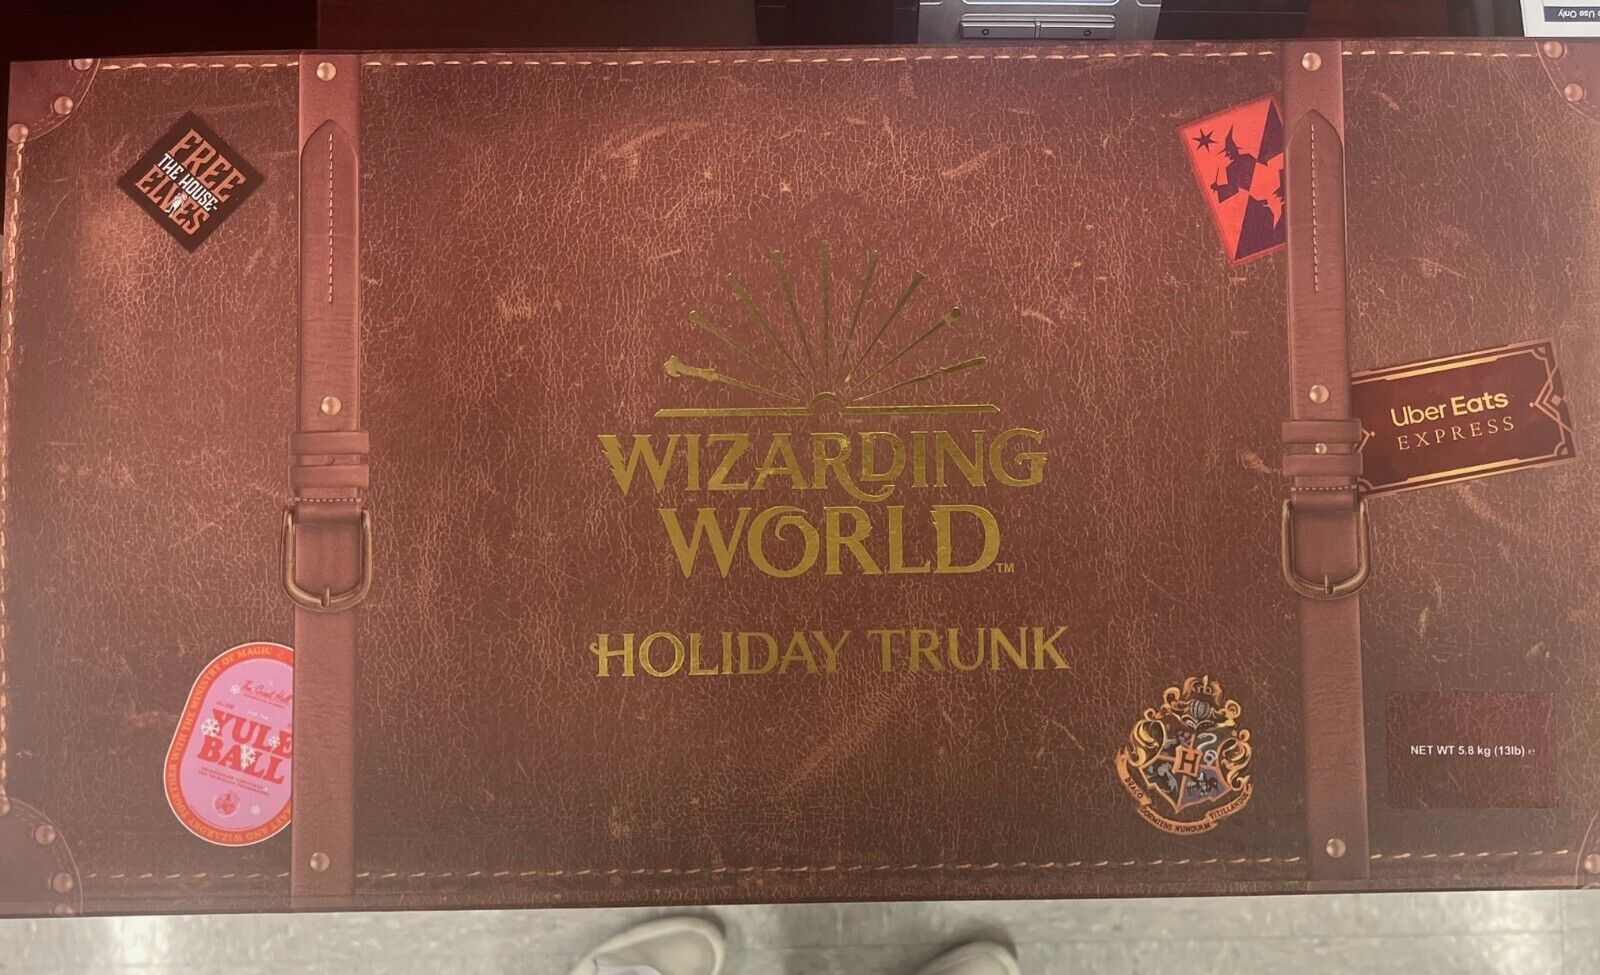 Harry Potter's Wizarding World Holiday Trunk